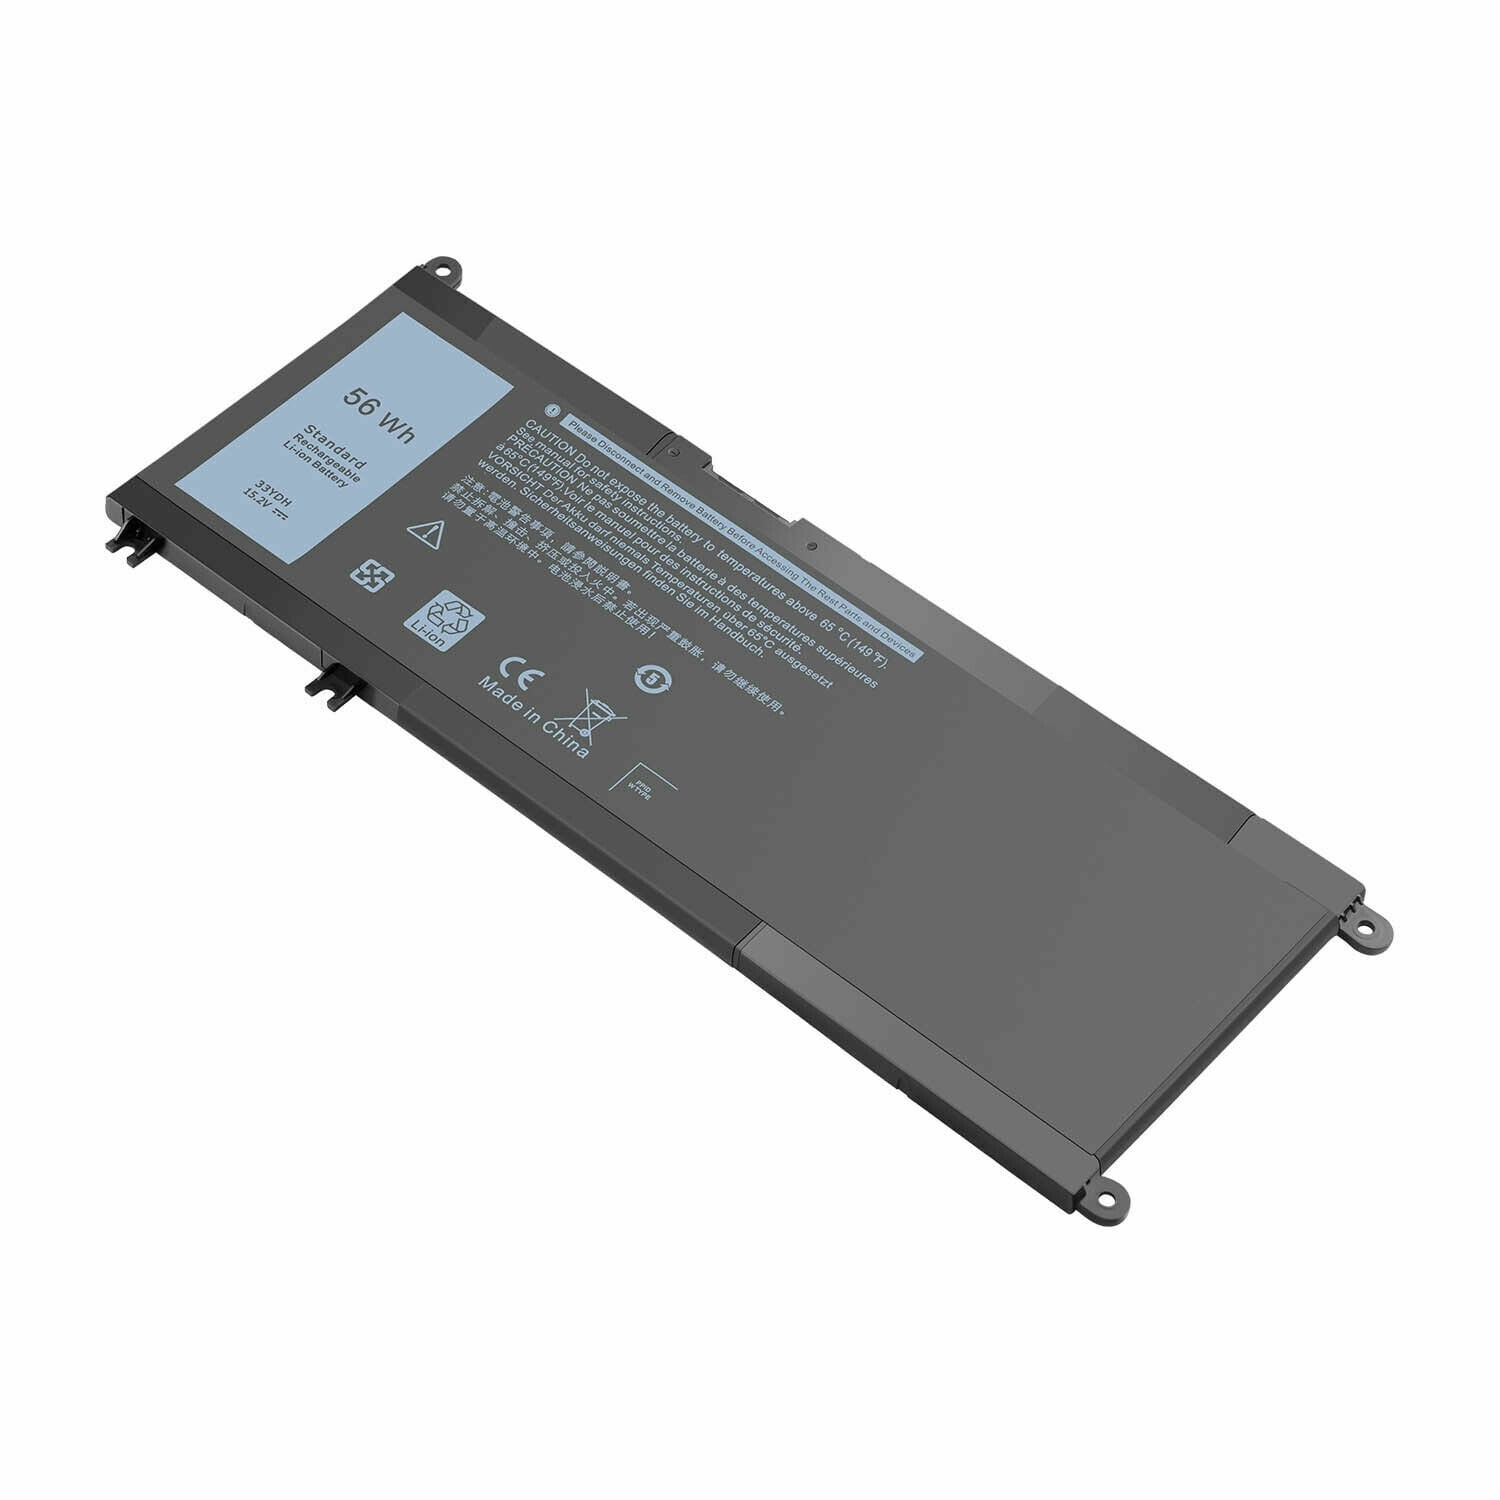 56Wh 33YDH Battery For Dell Inspiron 7577 758 Latitude 3580 3580 3490 3590  Serie 